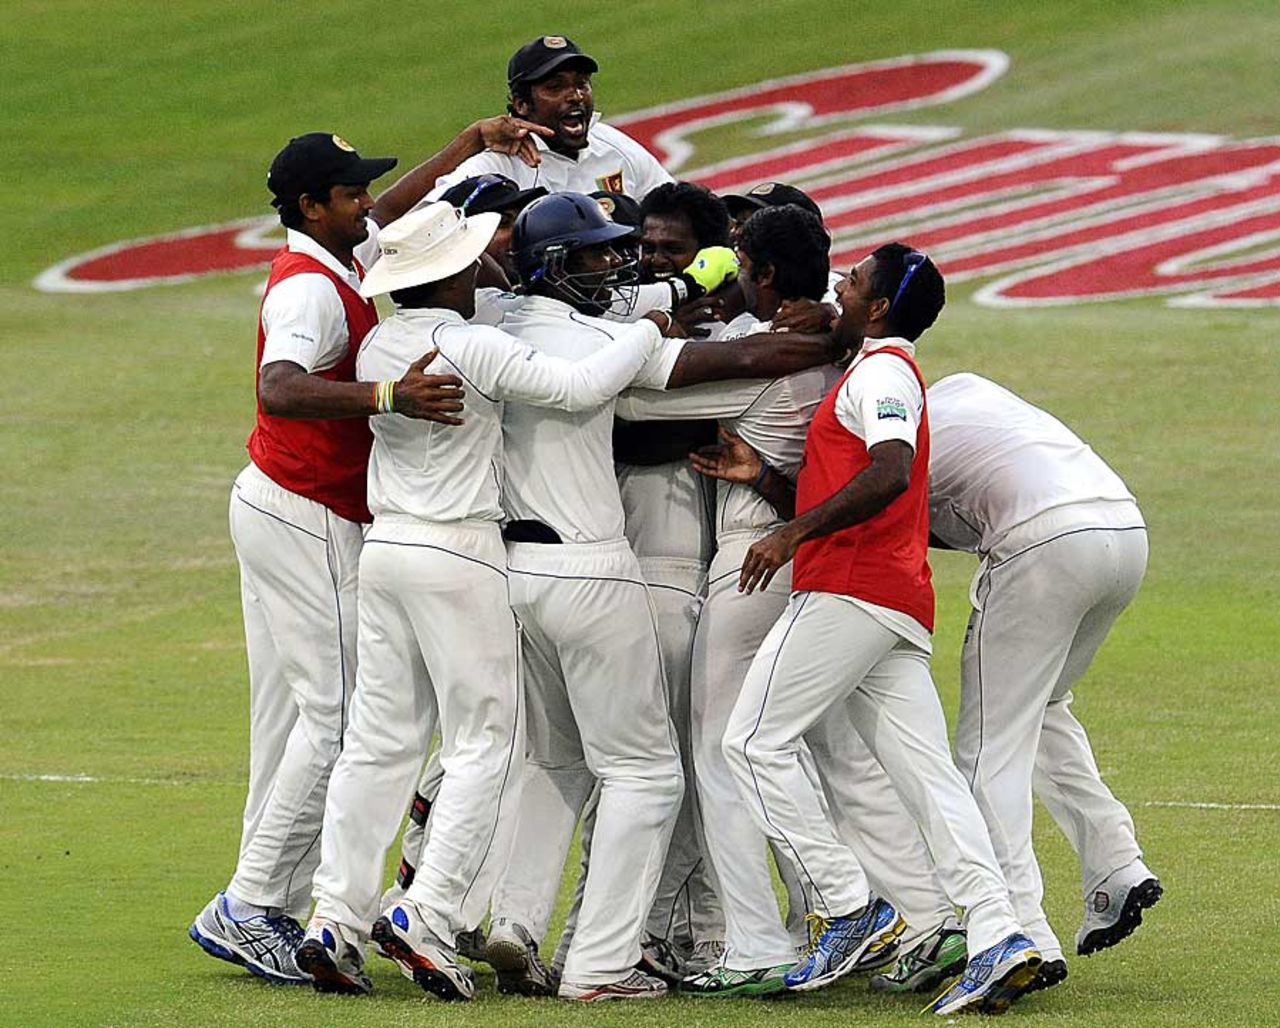 Sri Lanka celebrate their first Test win in South Africa, South Africa v Sri Lanka, 2nd Test, Durban, 4th day, December 29, 2011